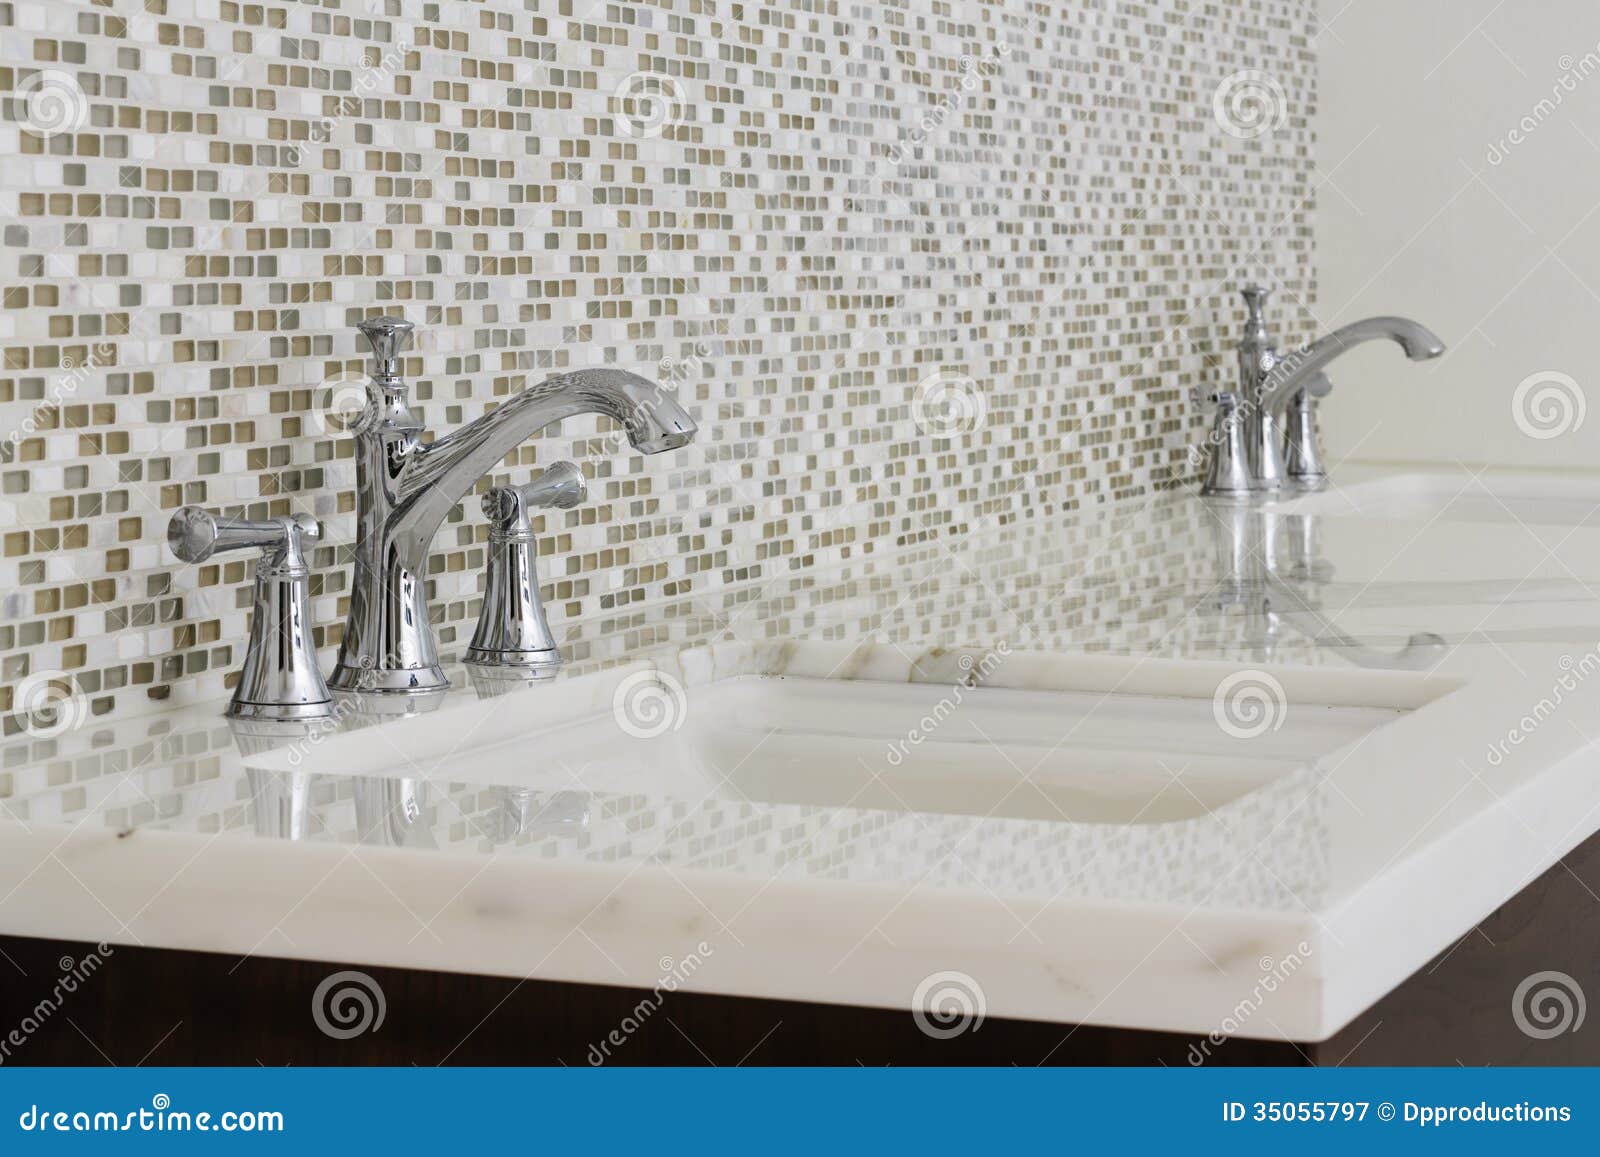 Contemporary Twin Bathroom Sinks And Fixtures Royalty Free Stock ...